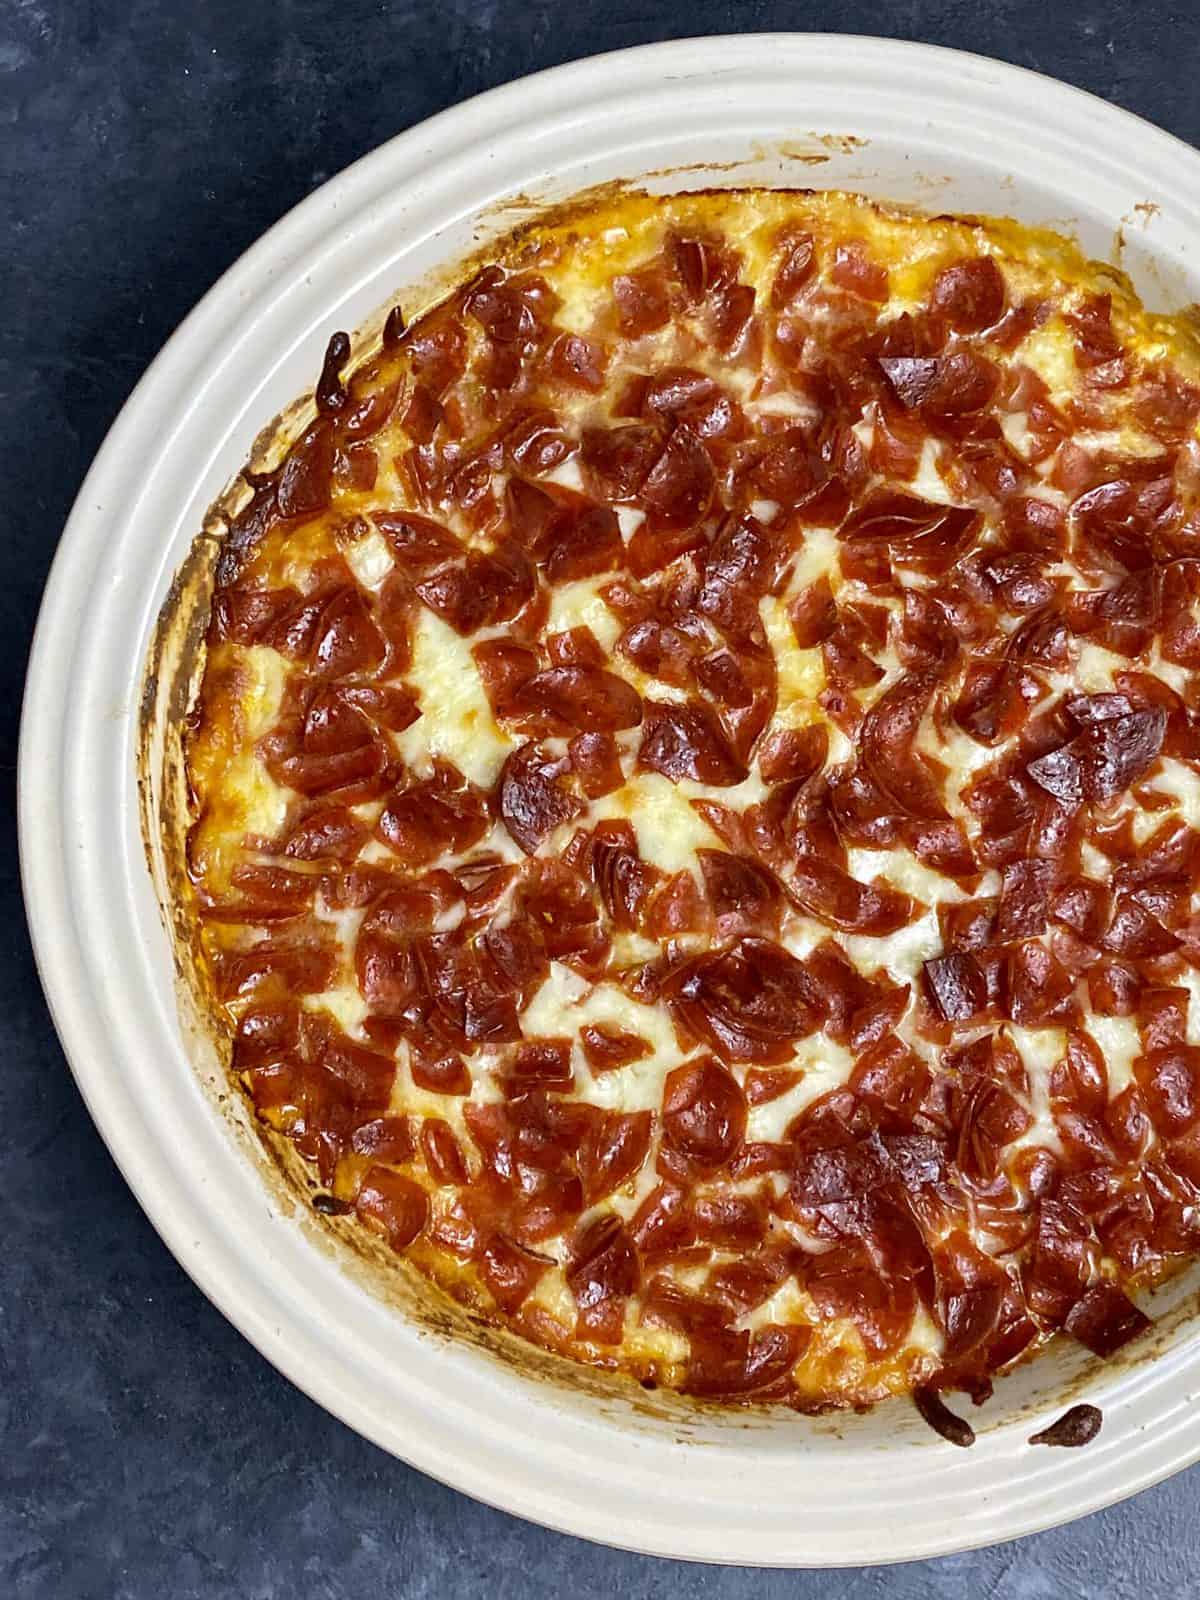 Baked pizza dip with charred edges and bits of pepperoni on top of a cheesy base.